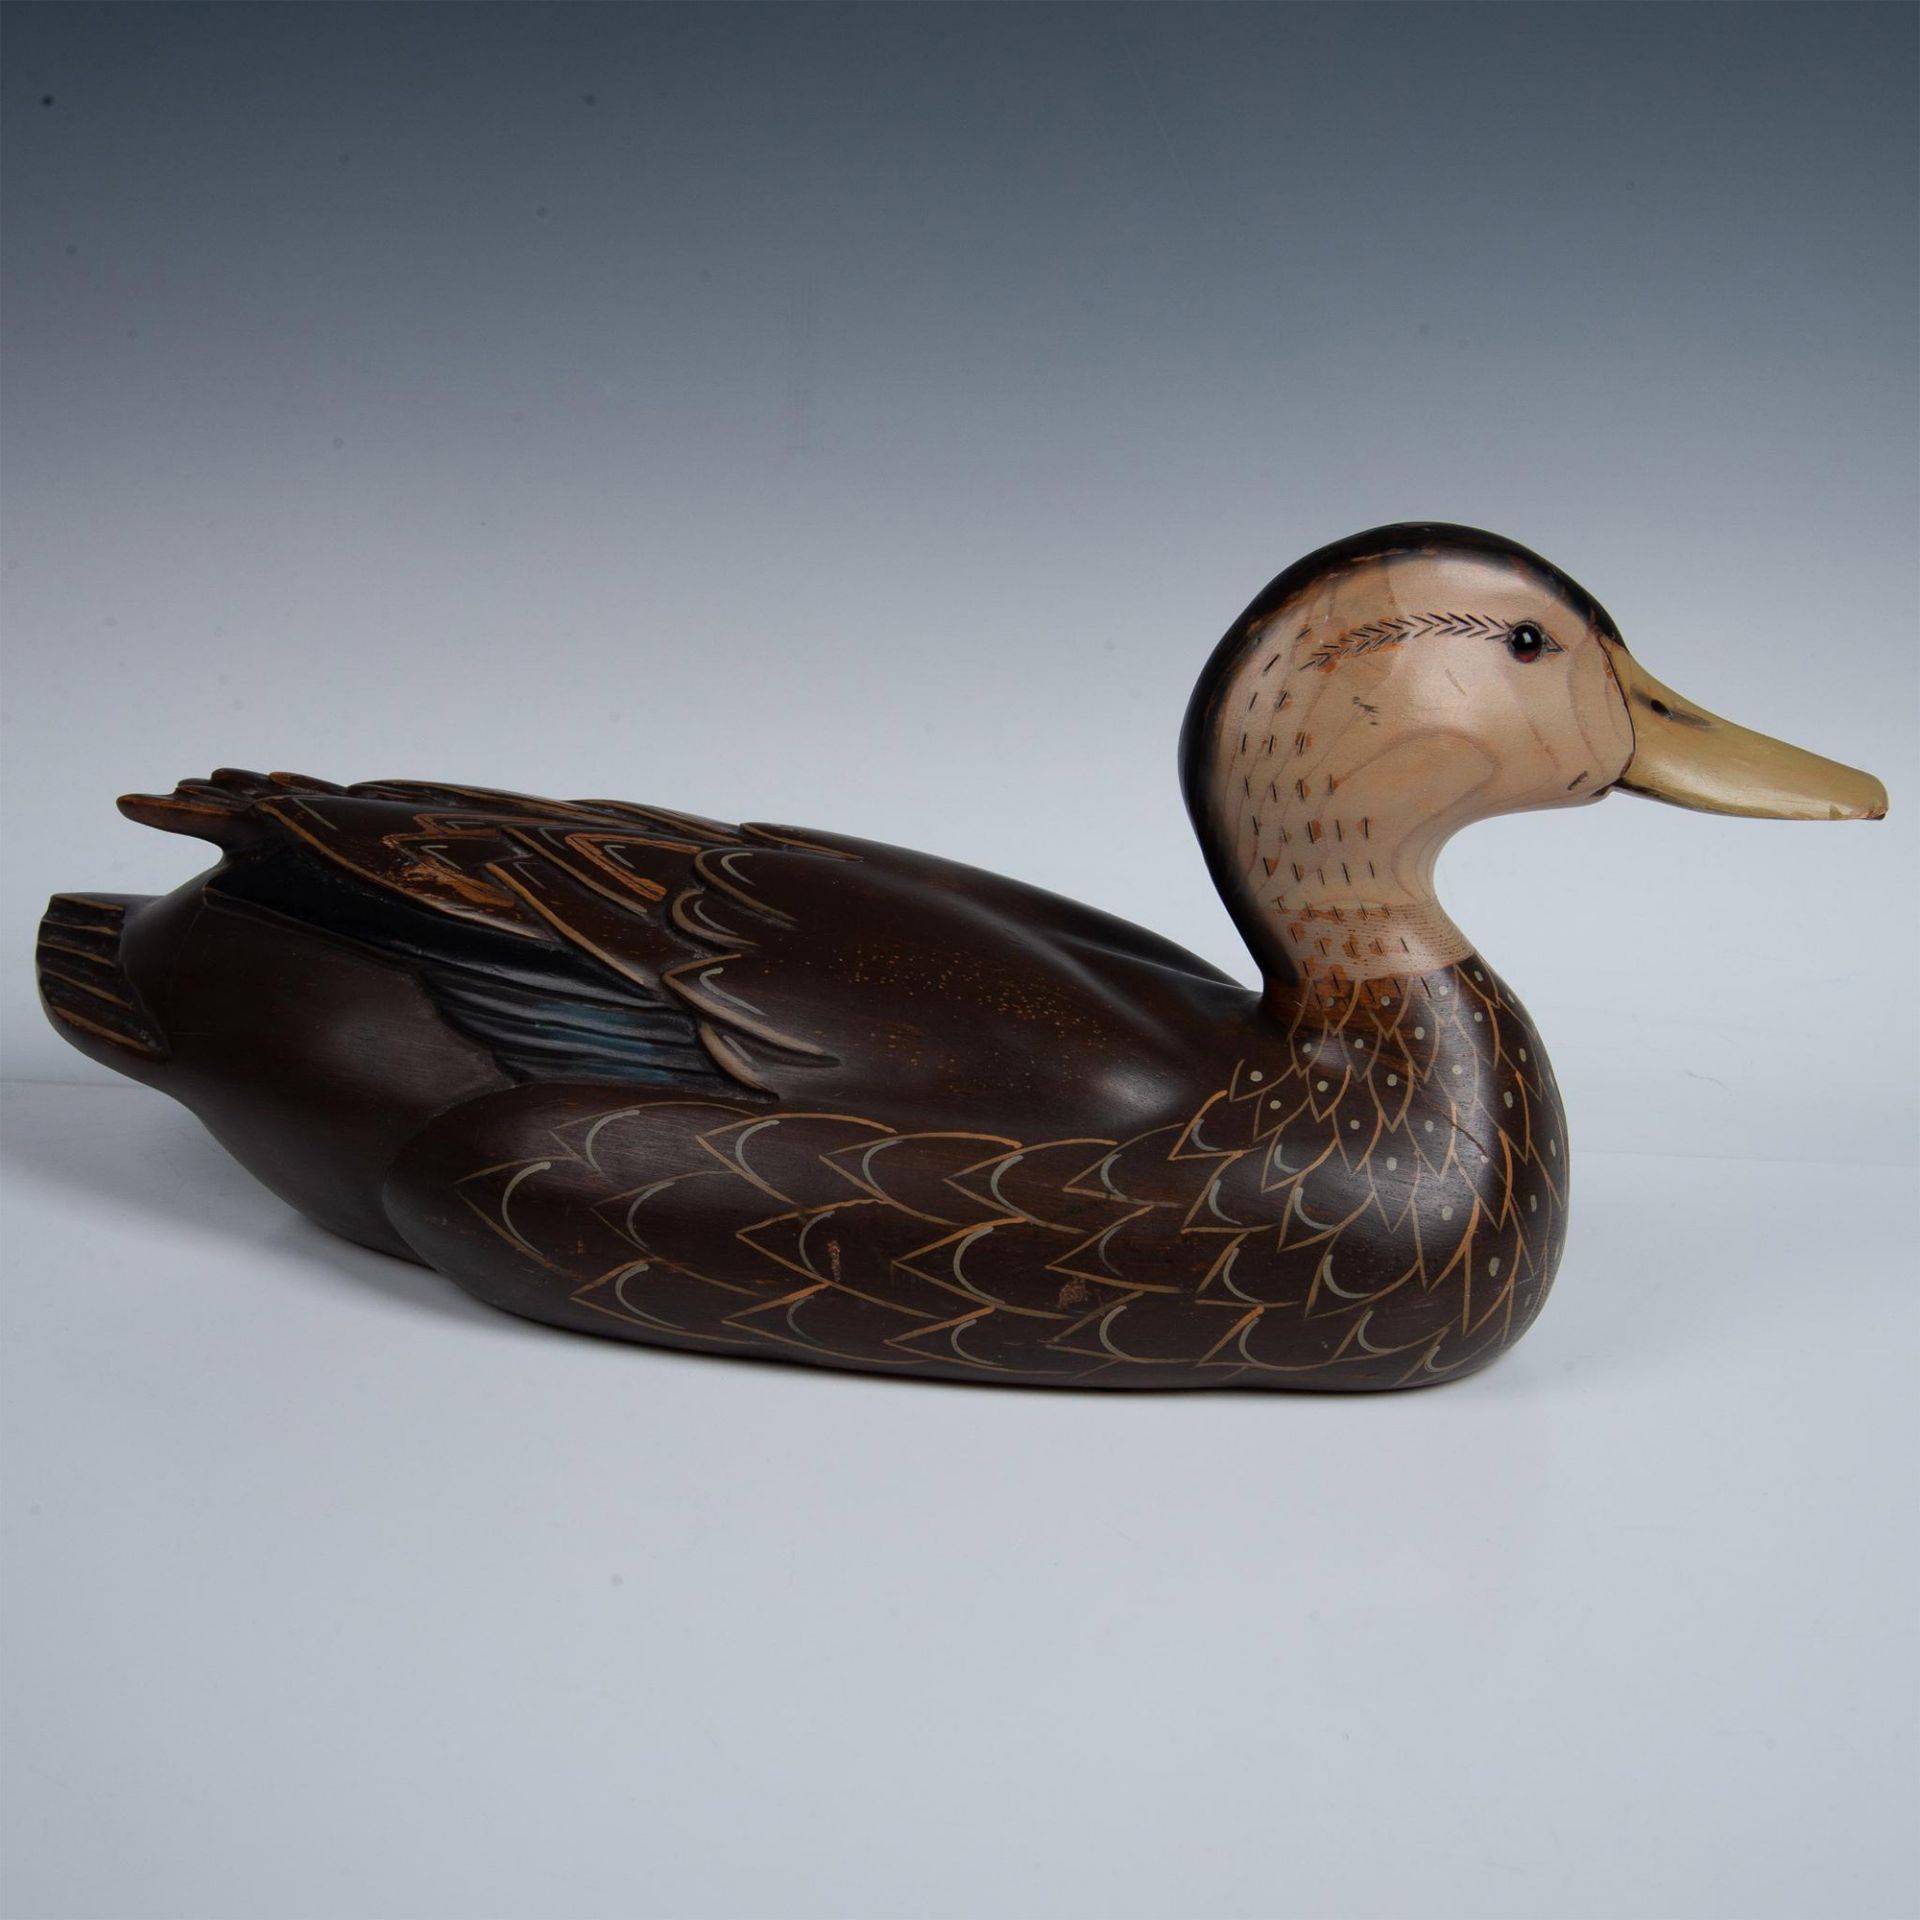 Vintage Ducks Unlimited by Tom Taber Duck Decoy - Image 3 of 5